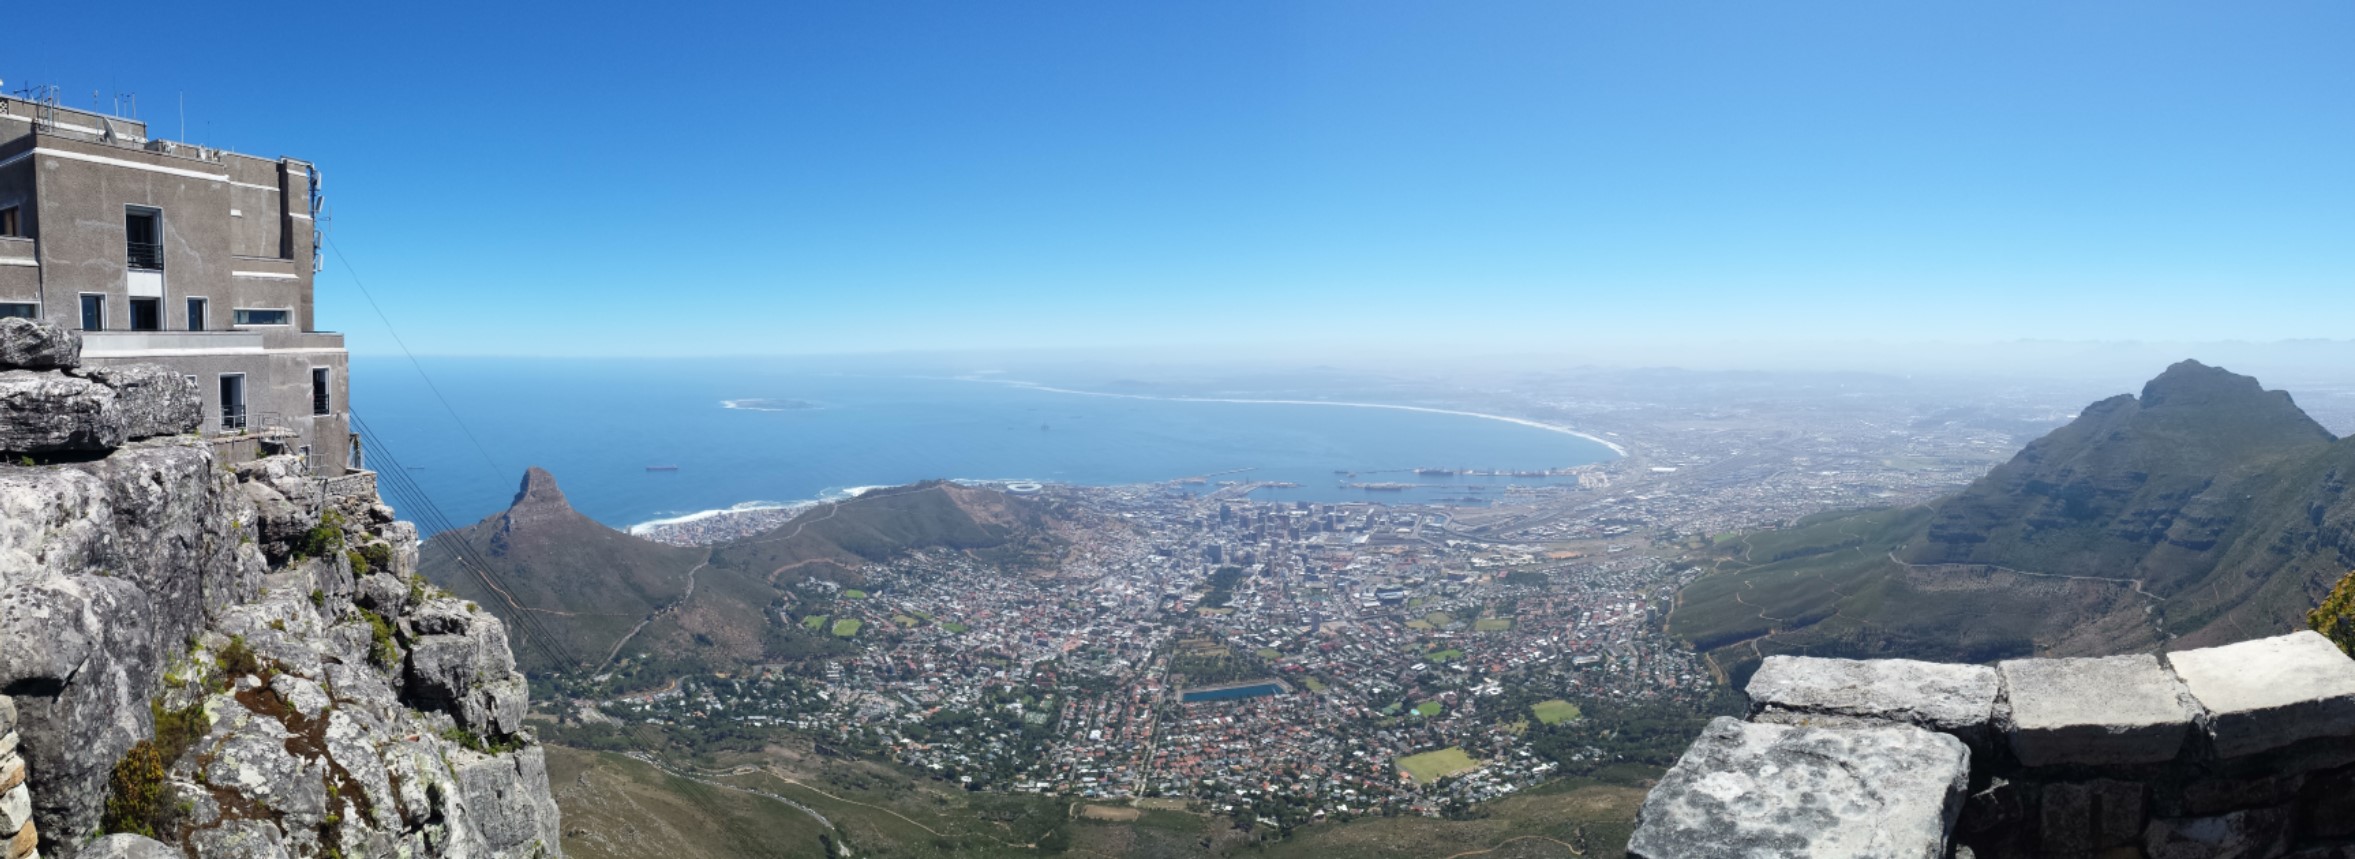 Pursley Table Mountain, Cape Town, South Africa